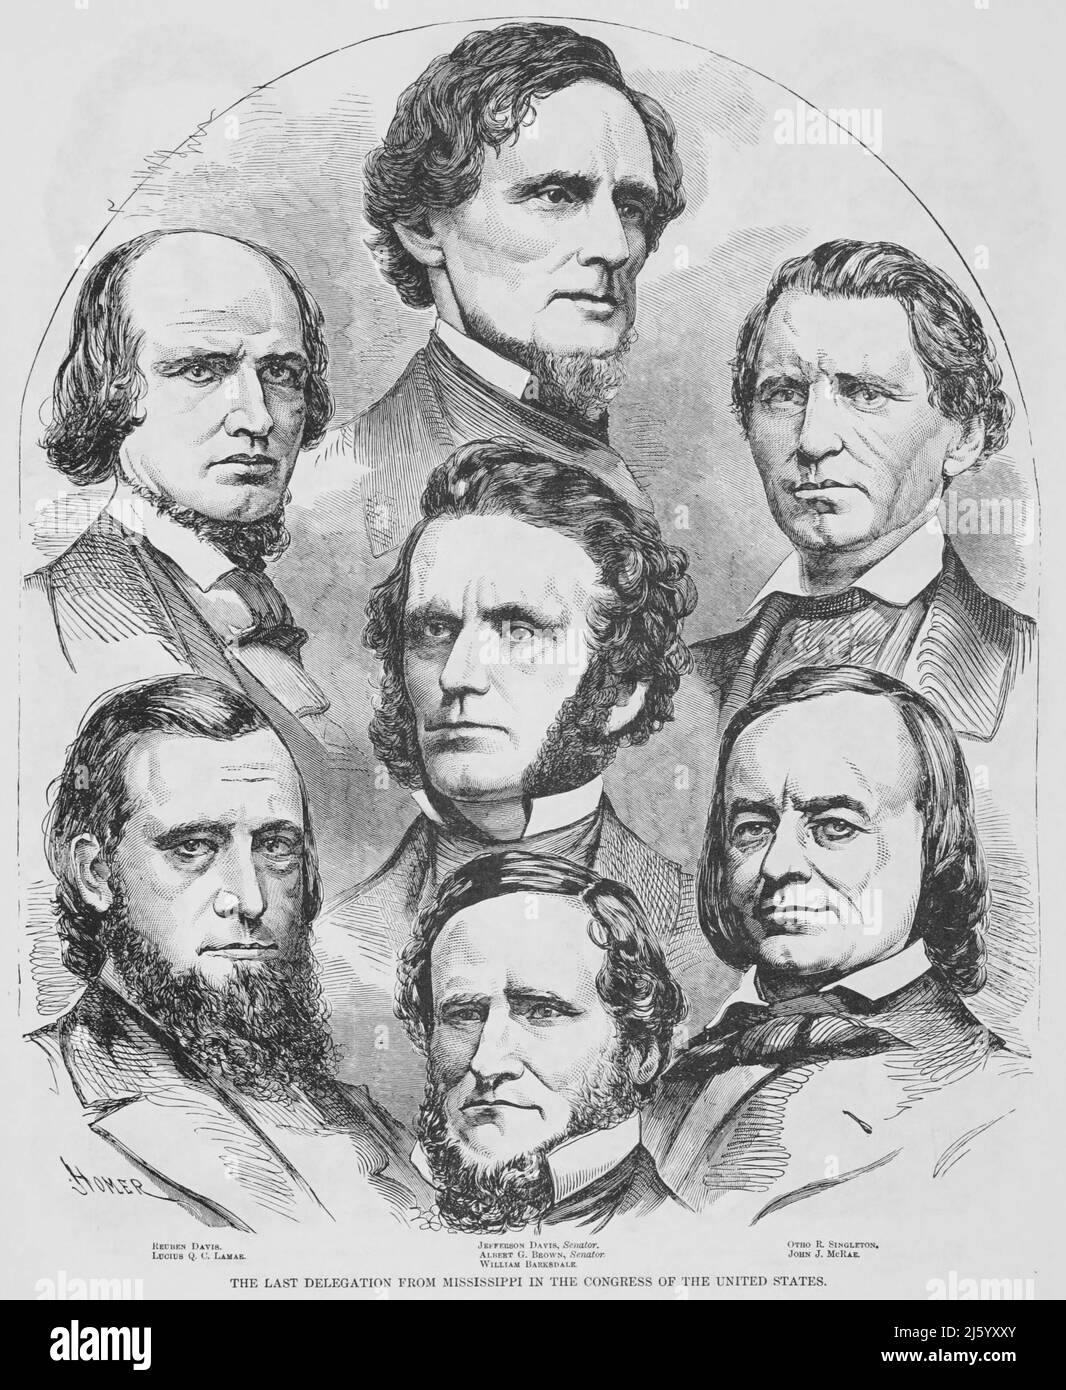 The Last Delegation from Mississippi in the Congress of the United States, prior to secession in the American Civil War. 19th century illustration Stock Photo